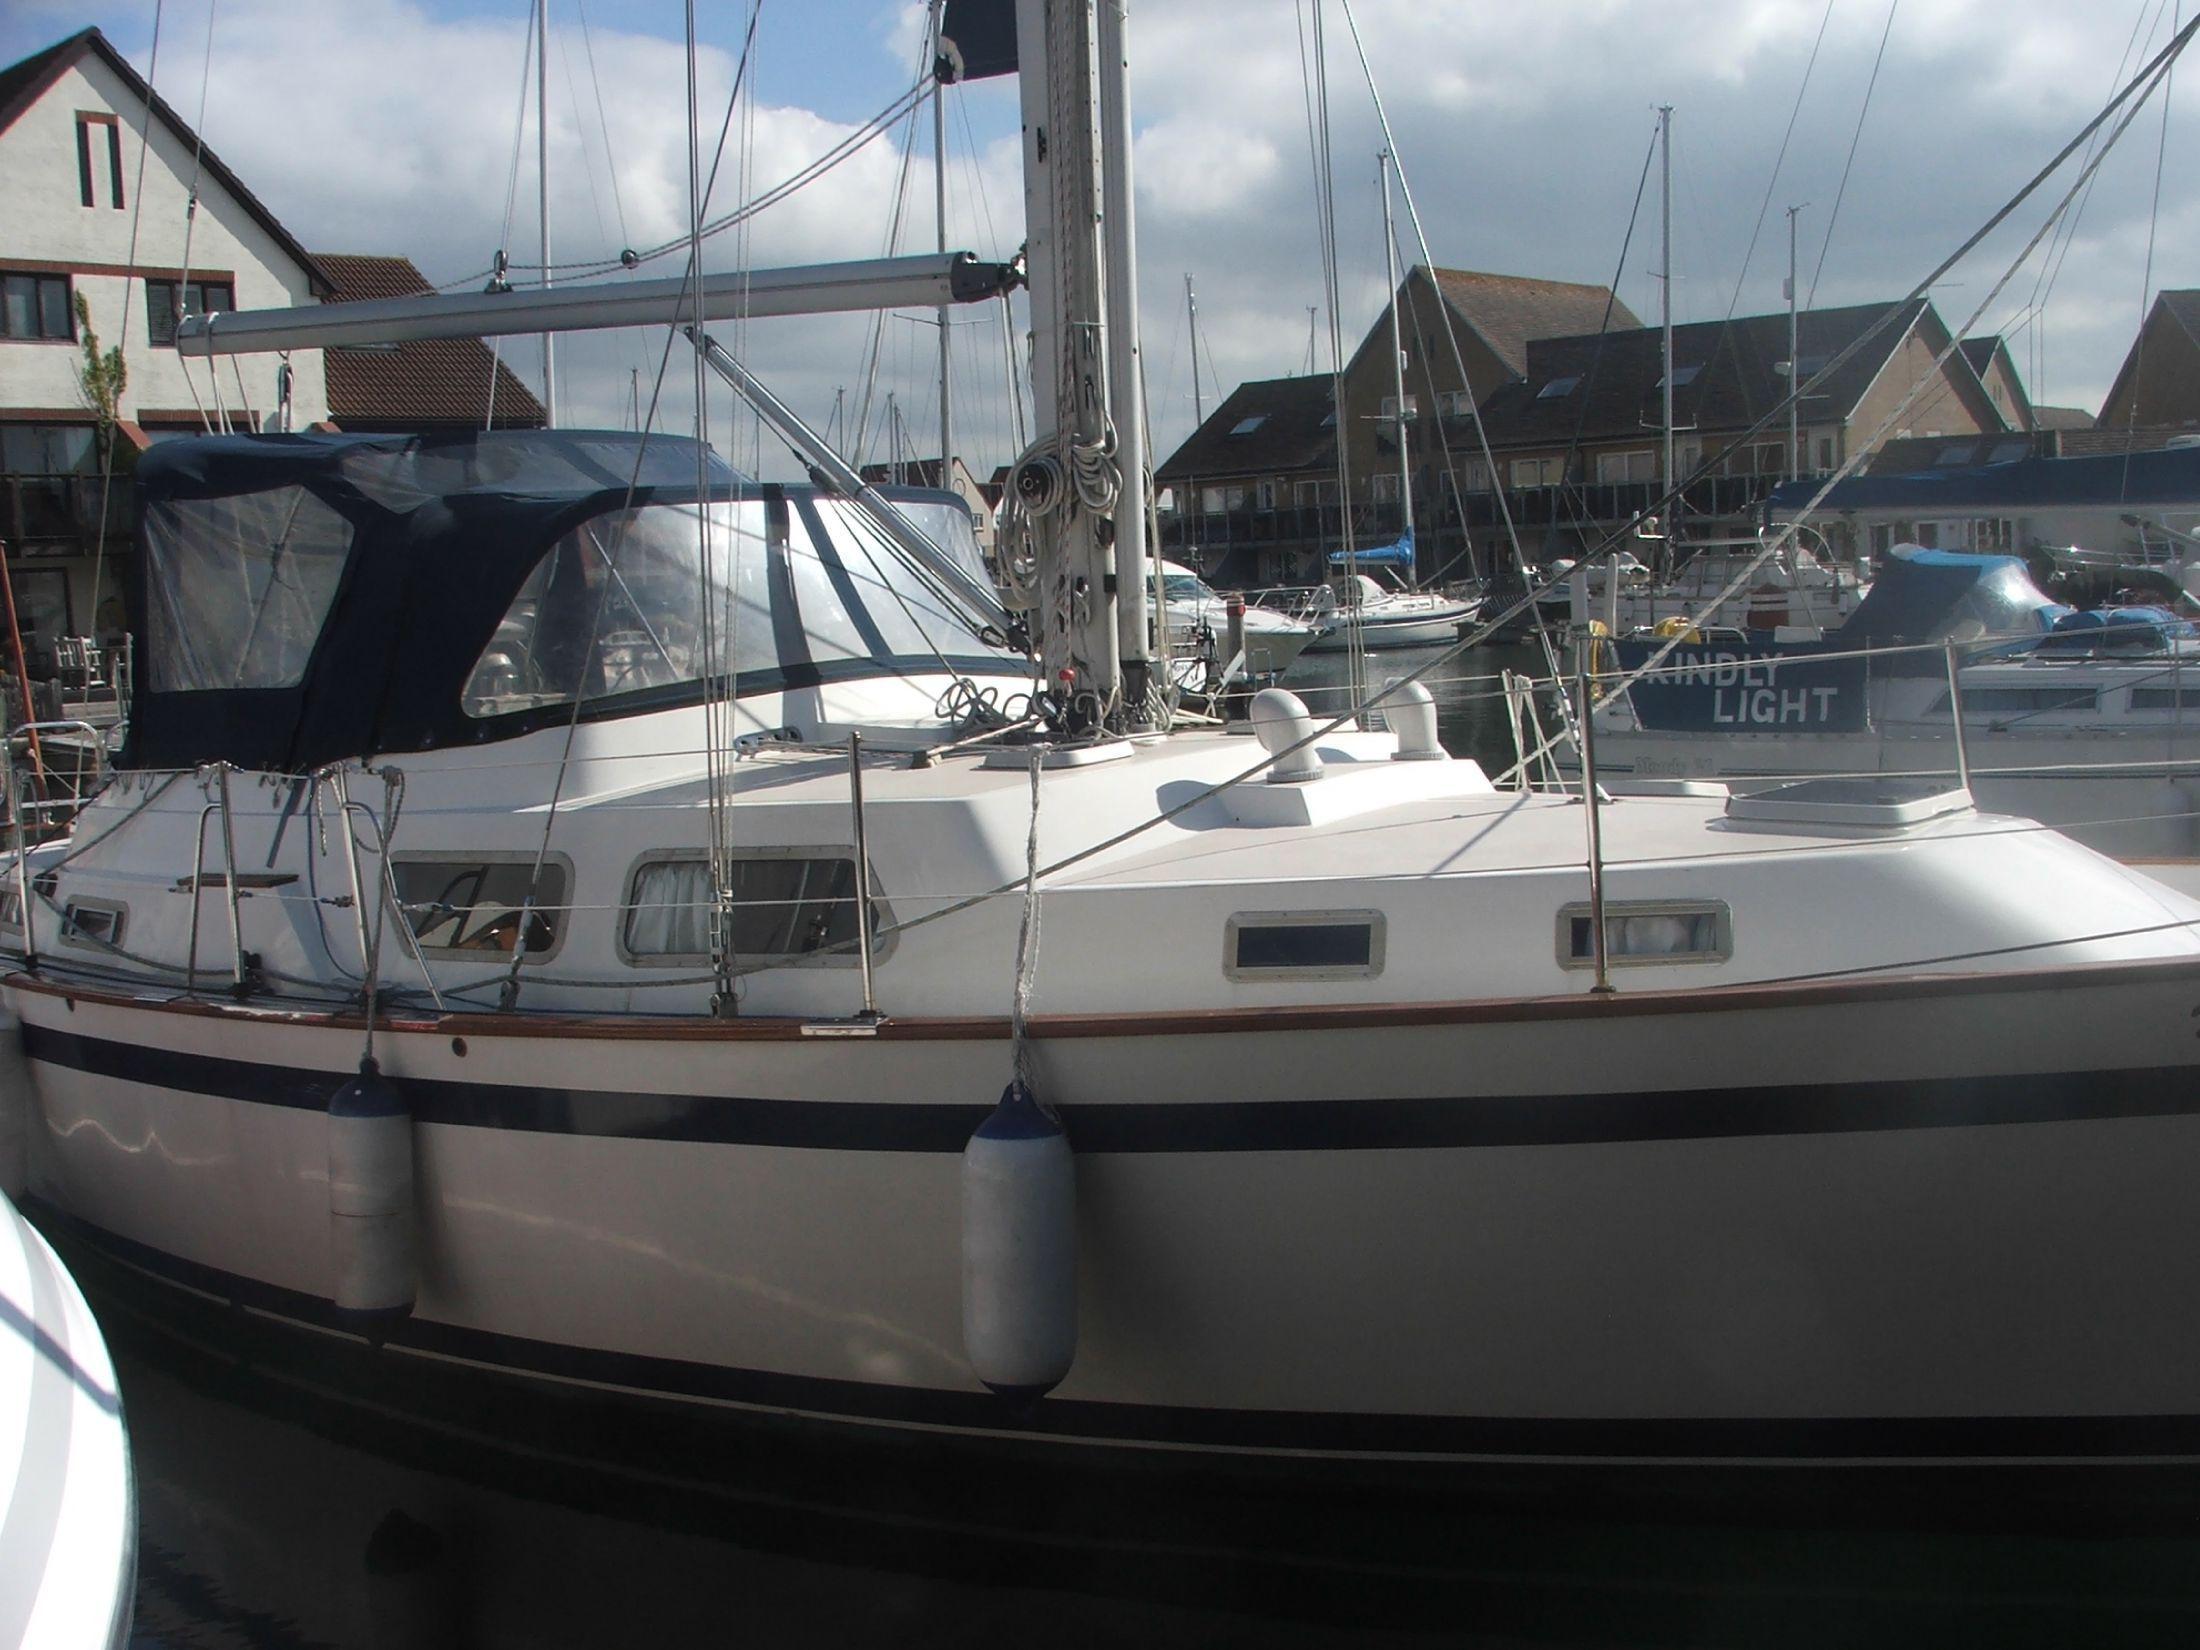 Hillyard Moonfleet 36 (Southerly Moody), Eastbourne